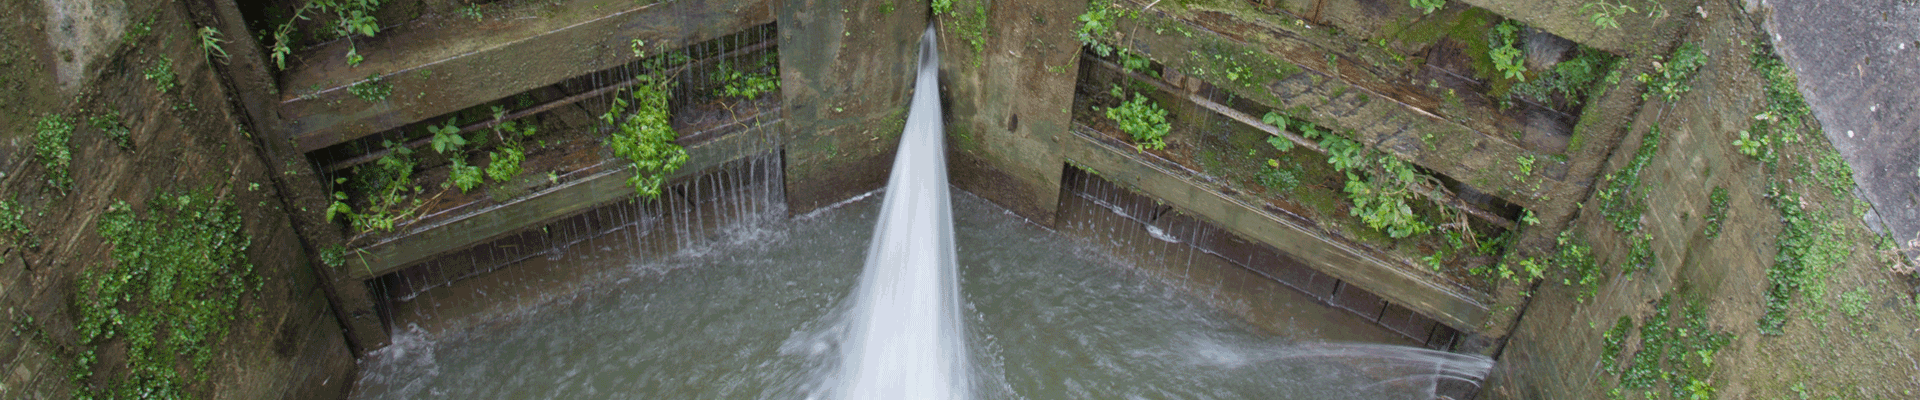 Canal leakage